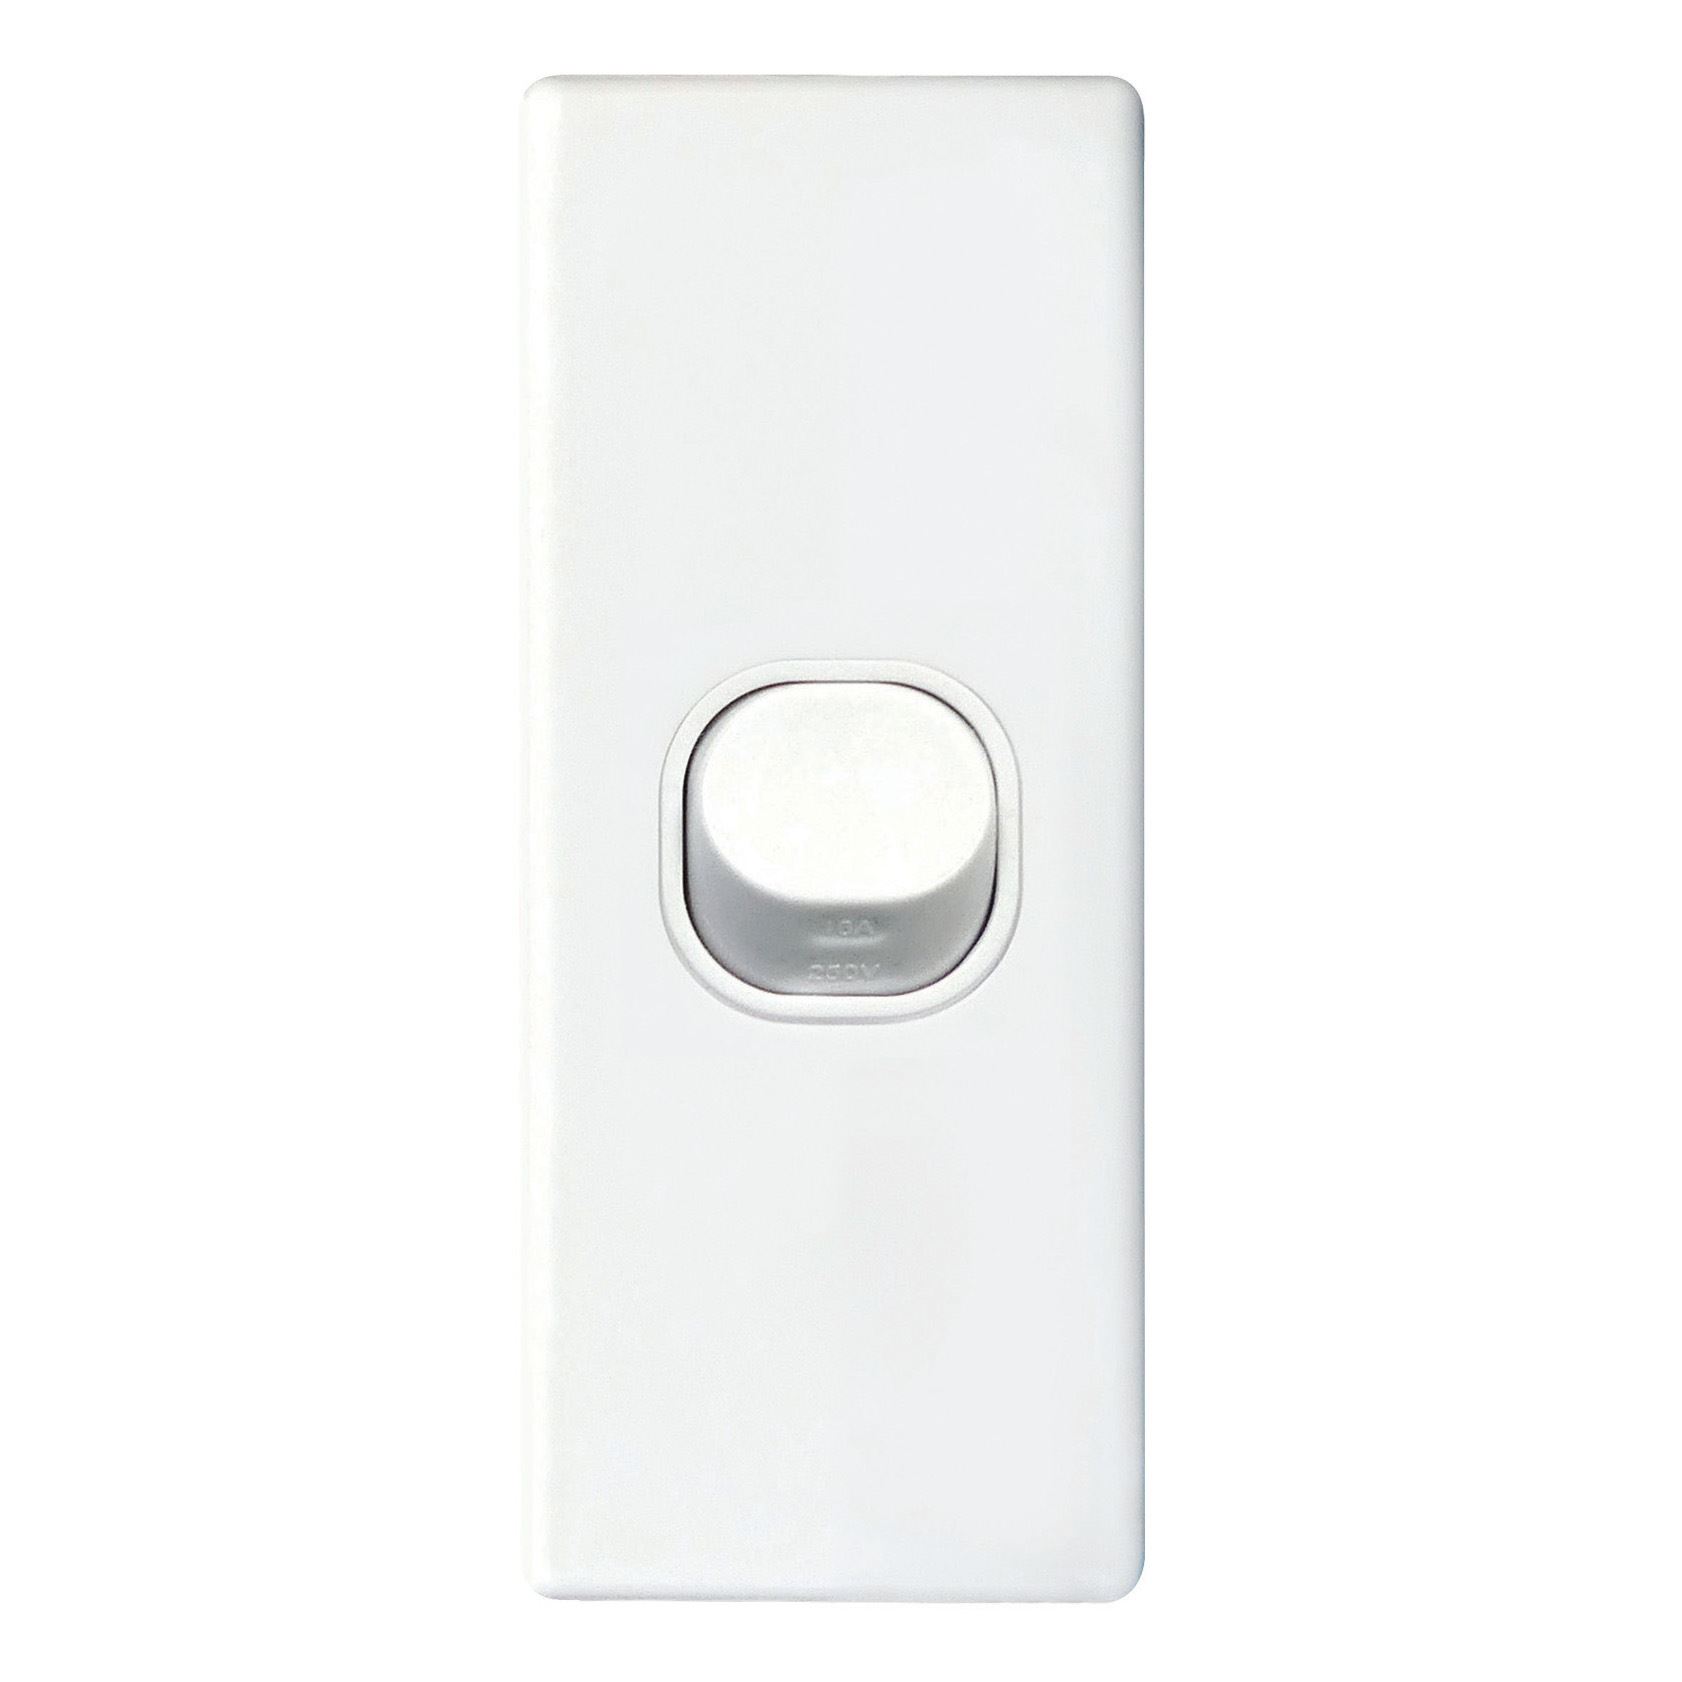 1Gang 16Amp Architrave Wall Switch - White